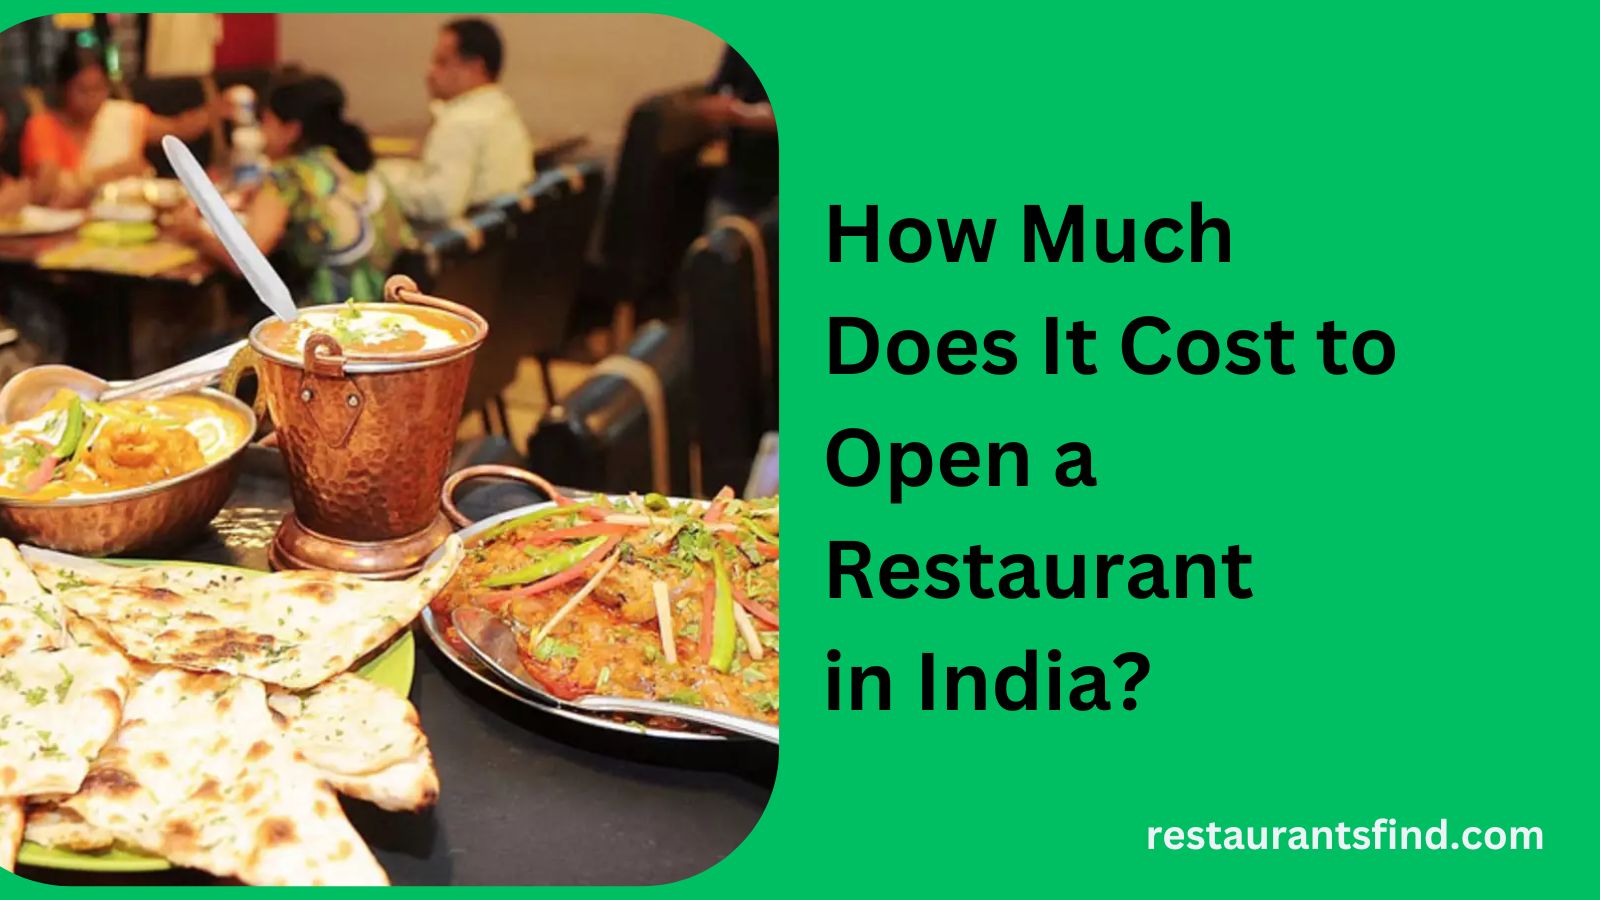 How Much Does It Cost to Open a Restaurant in India?